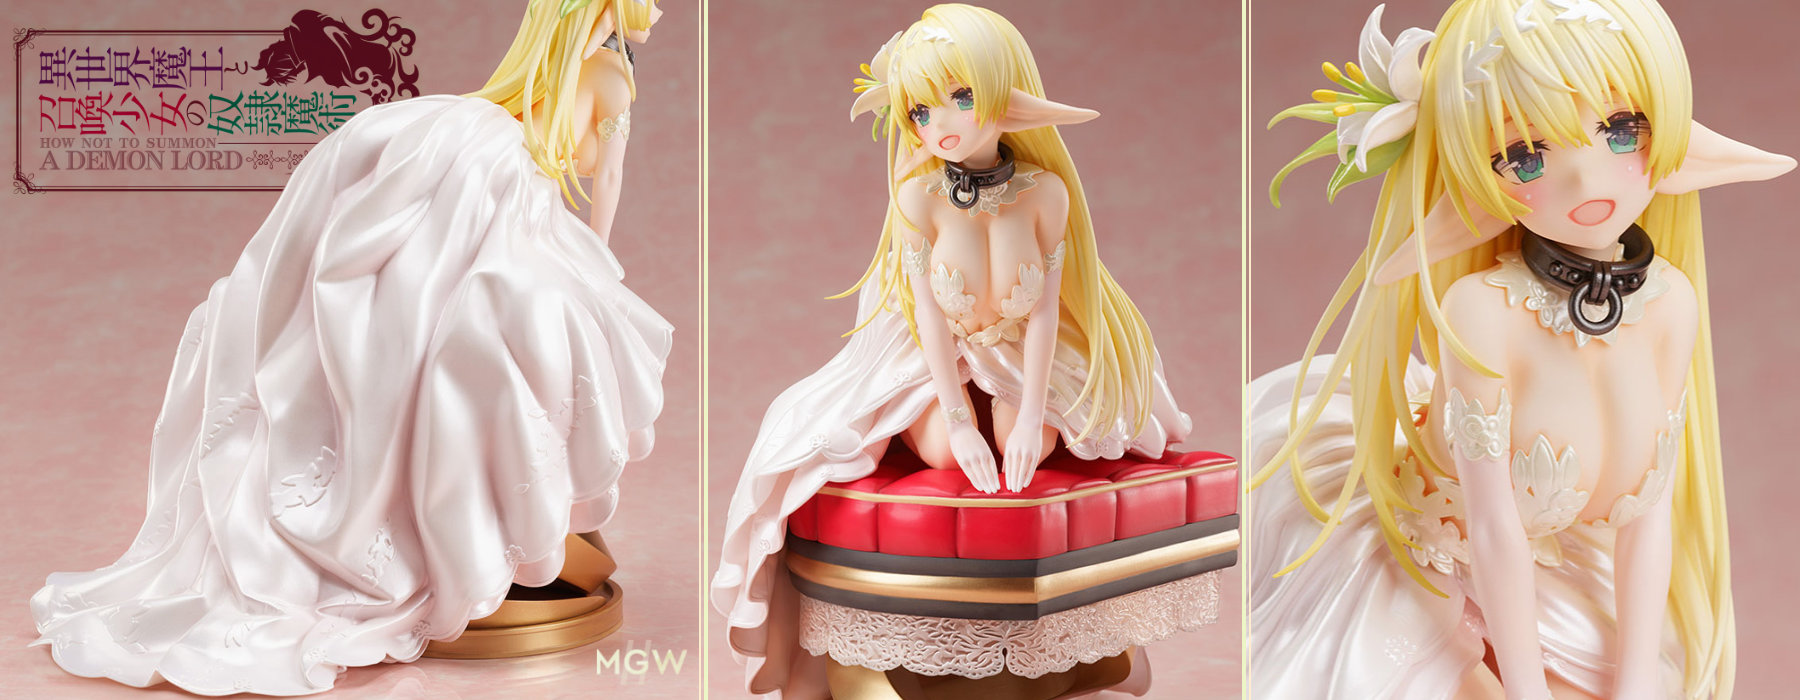 Shera L. Greenwood Wedding Dress by FuRyu from How NOT to Summon a Demon Lord MyGrailWatch Anime Figure Guide